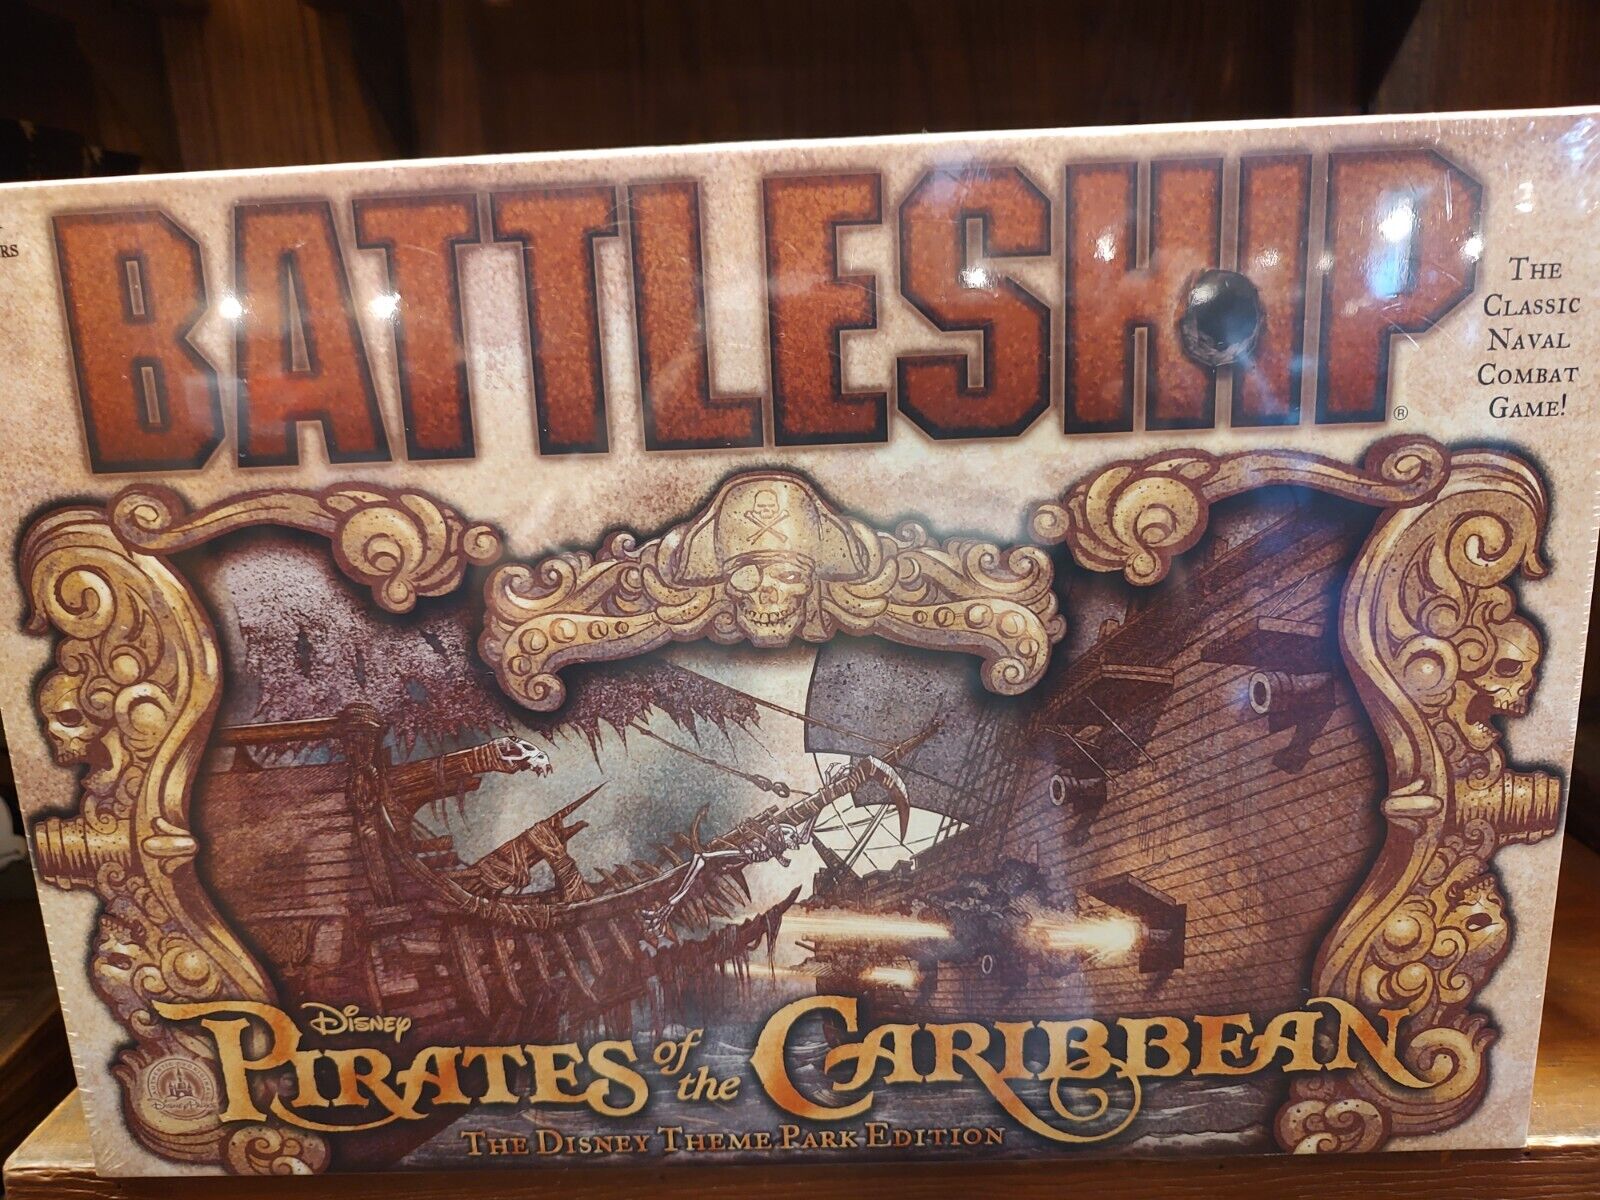 Disney Parks Edition Exclusive Pirates of the Caribbean Battleship Board Game NW